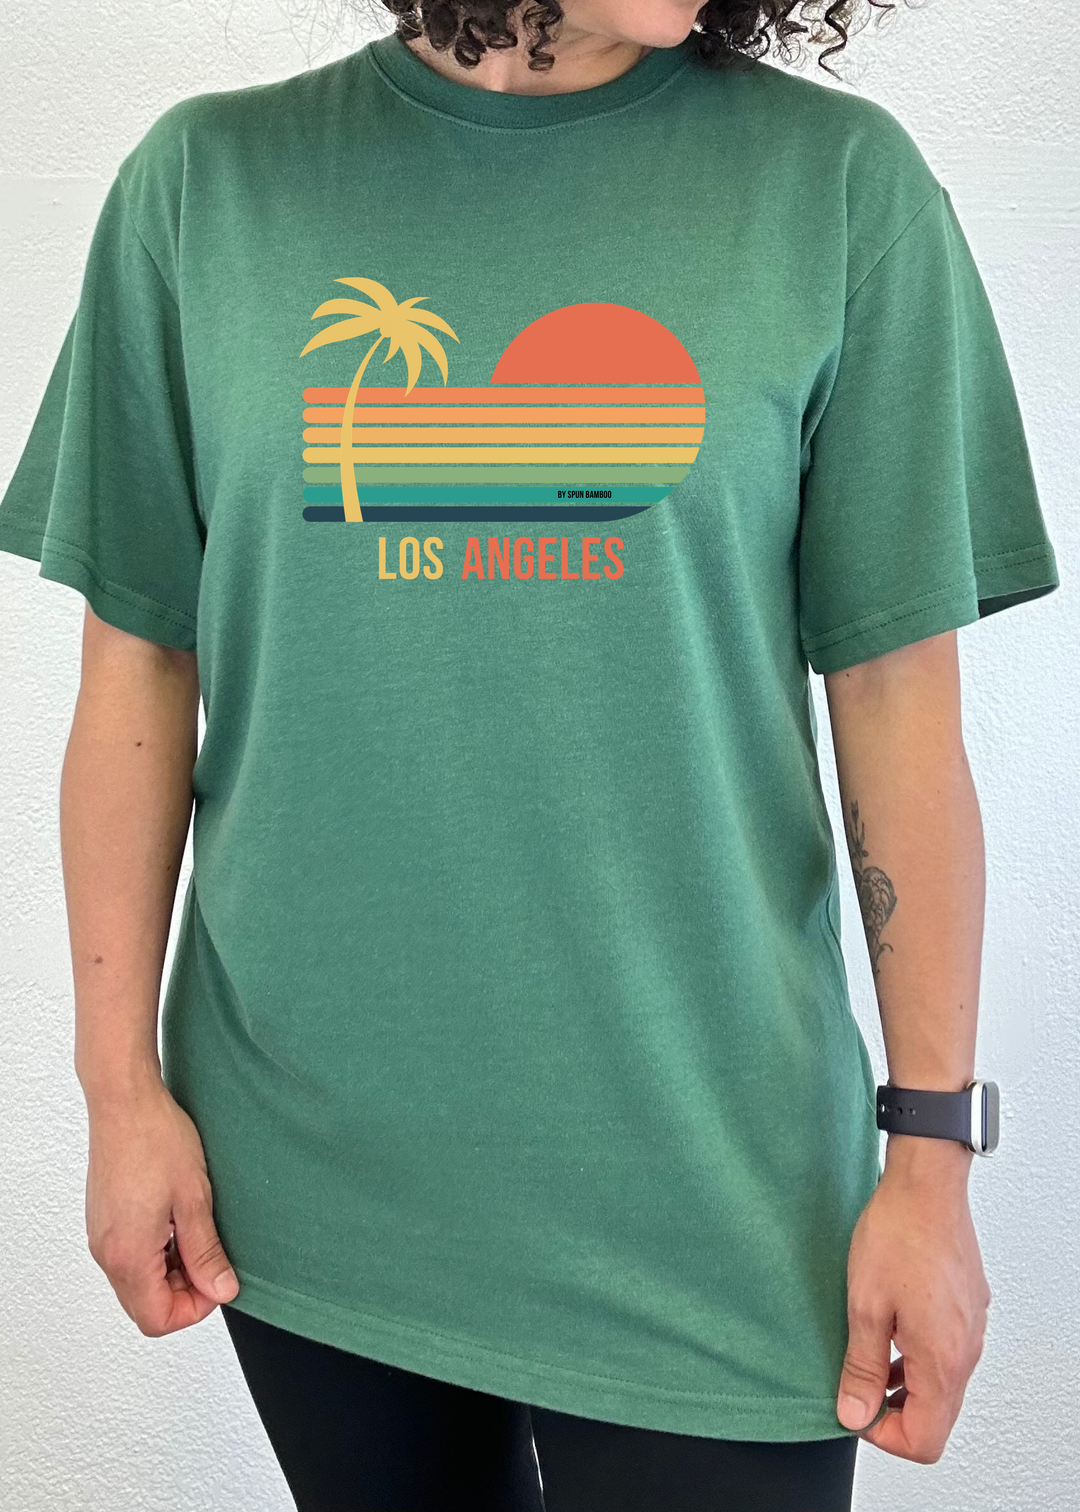 Los Angeles Unisex Graphic Bamboo T-Shirt teal